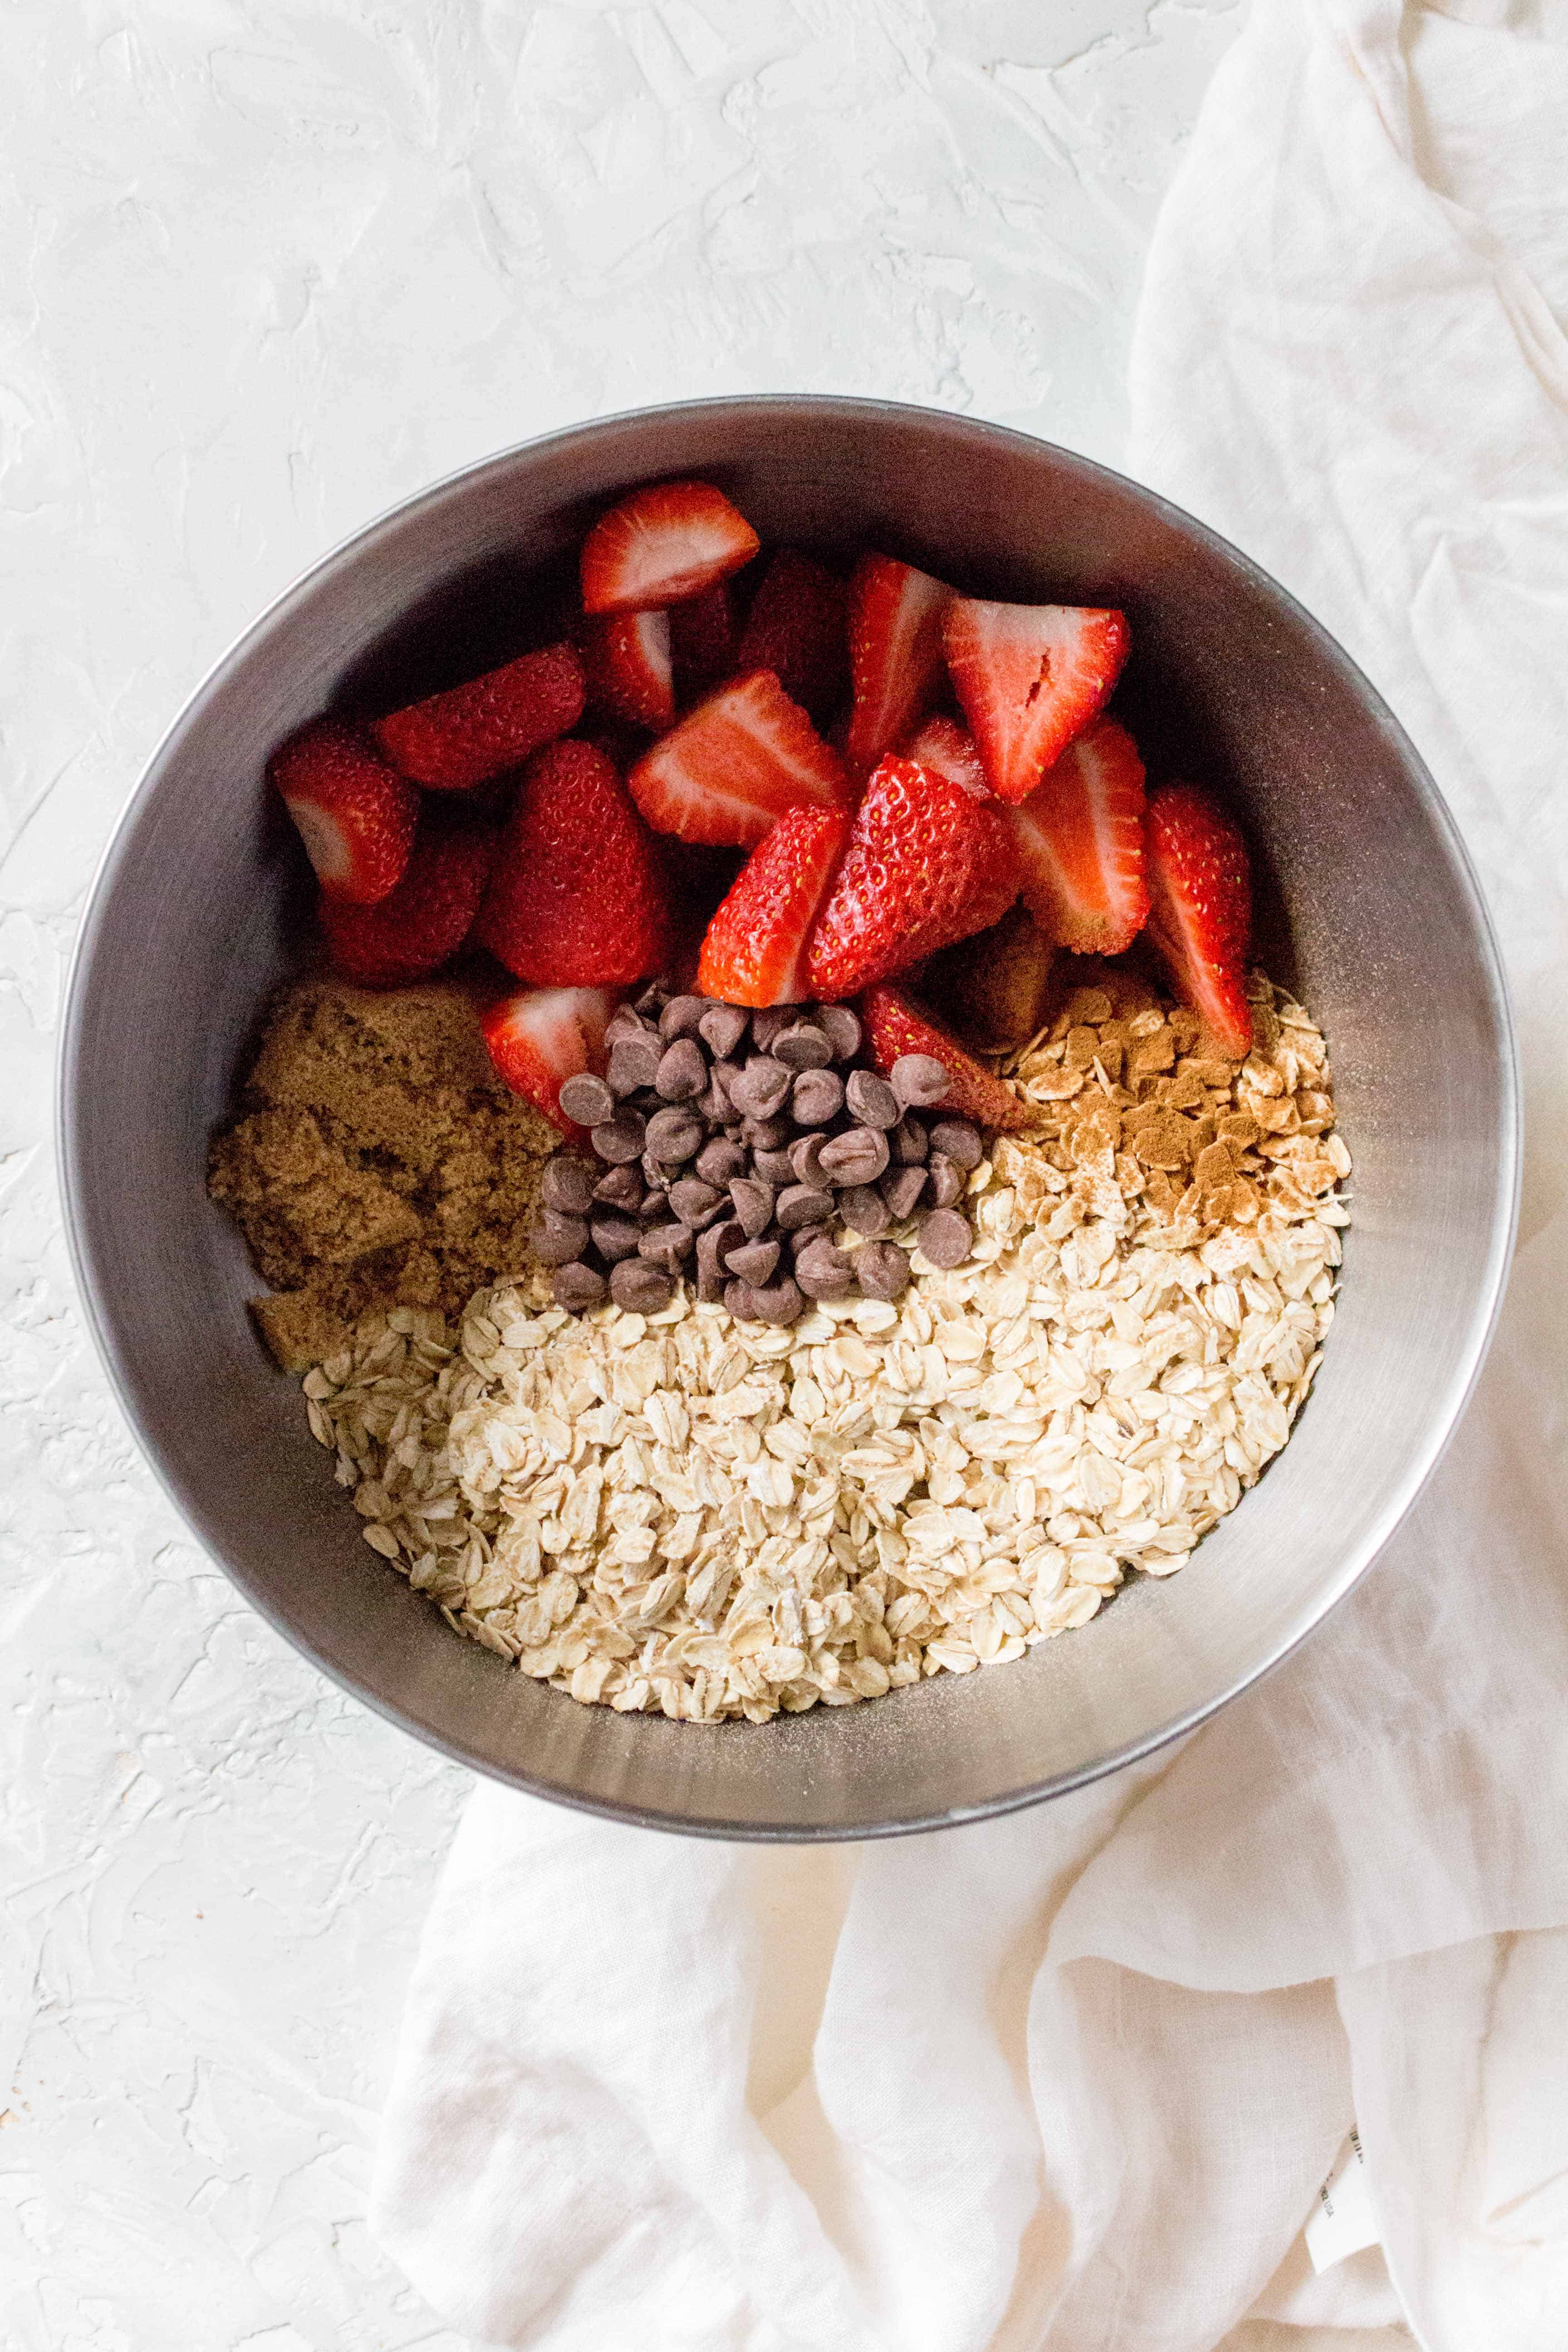 Strawberry with Chocolate Oatmeal Bake